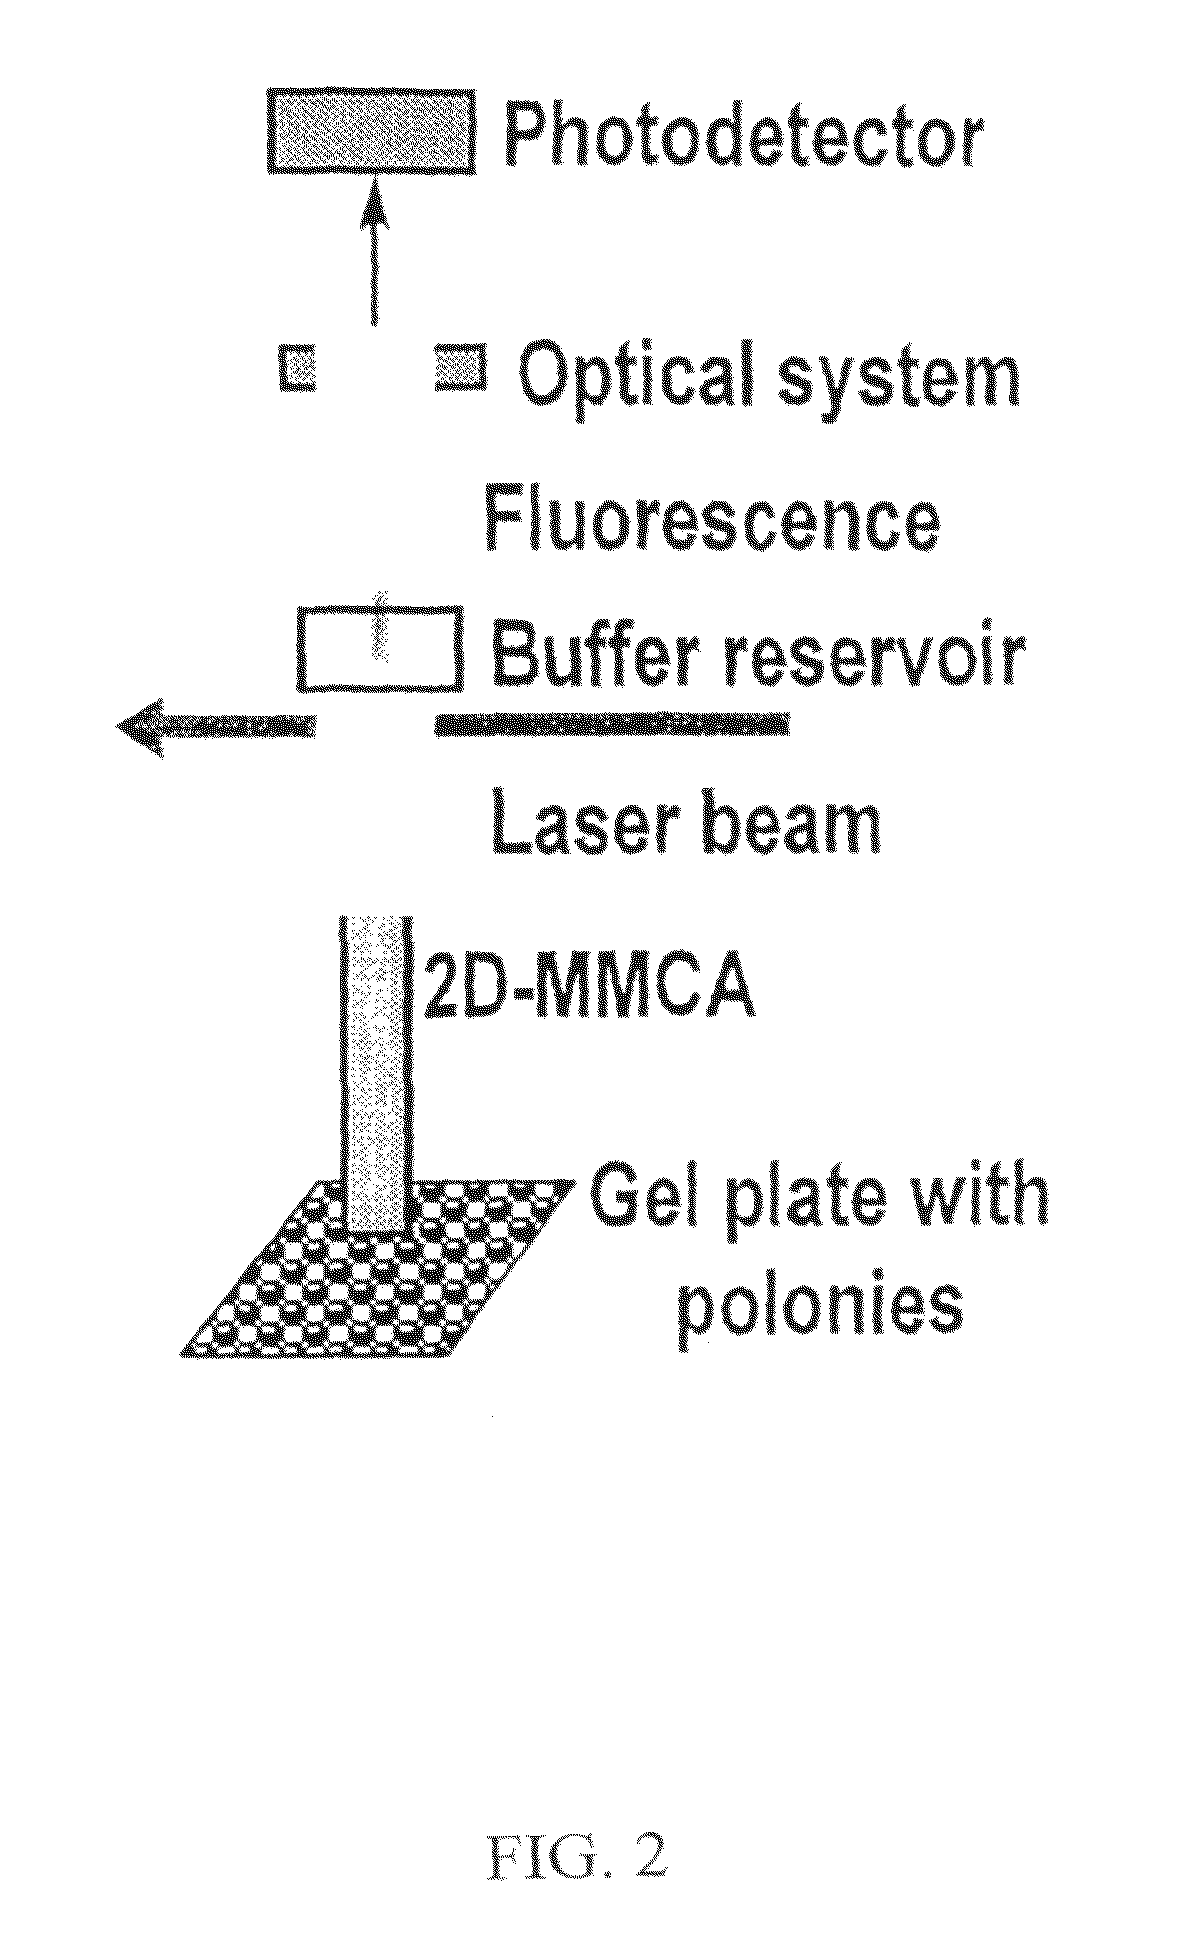 Massively parallel 2-dimensional capillary electrophoresis